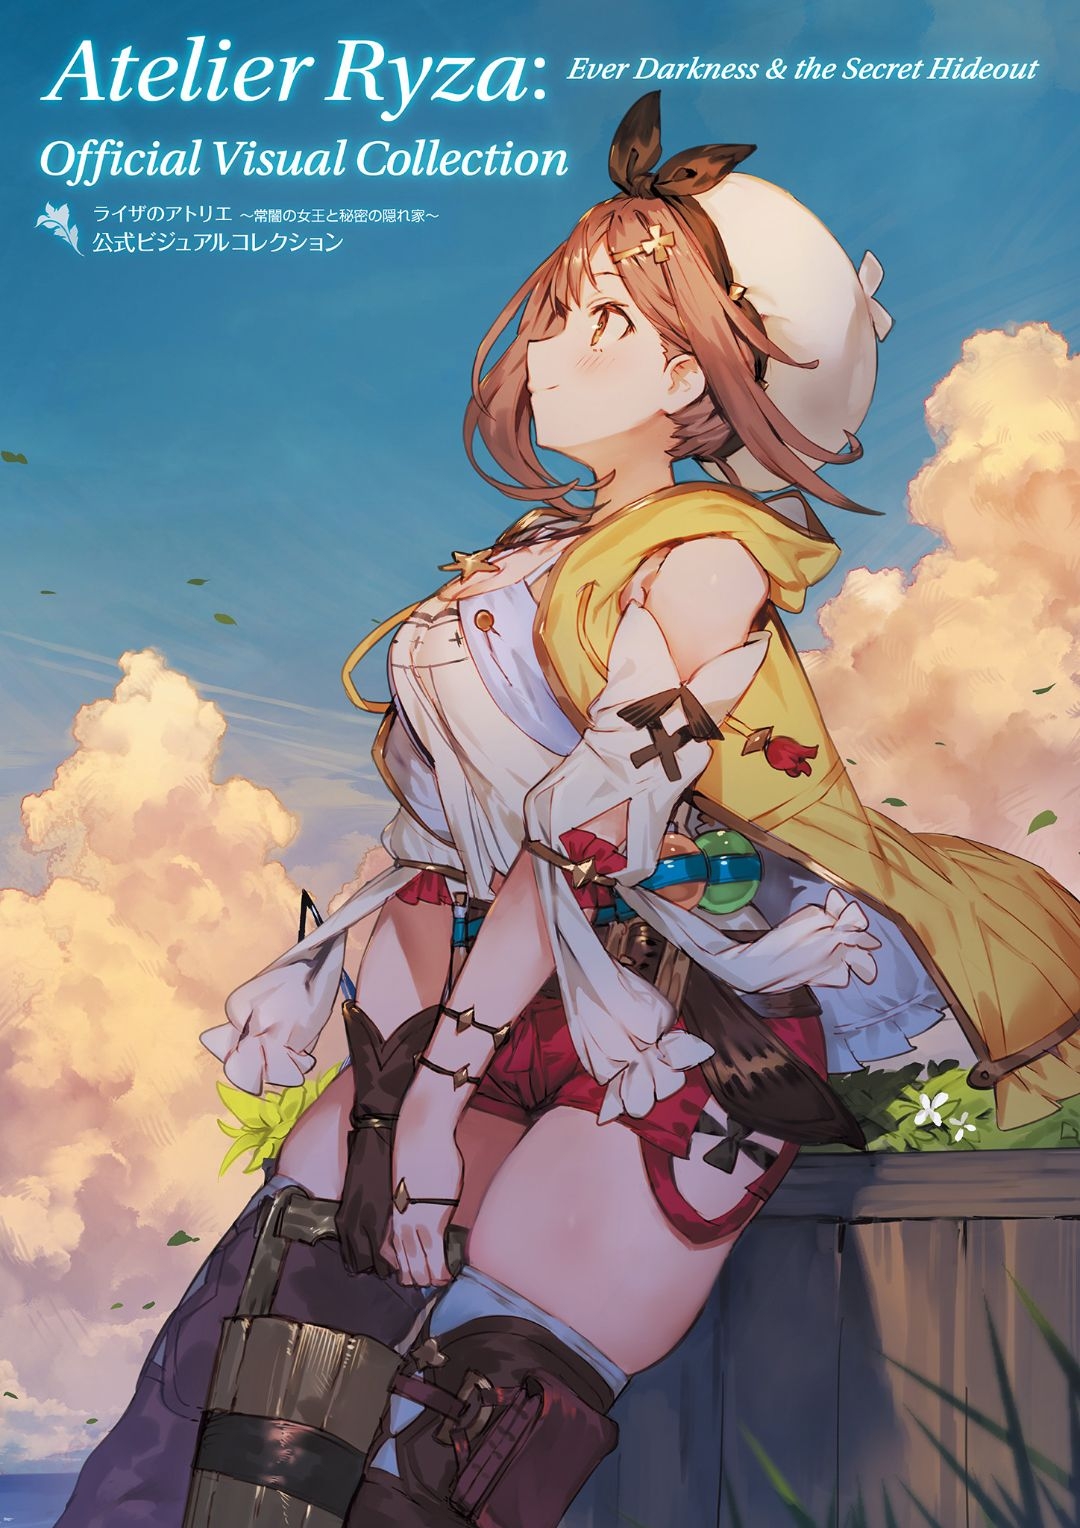 Atelier Ryza: Ever Darkness & the Secret Hideout Official Visual Collection 0